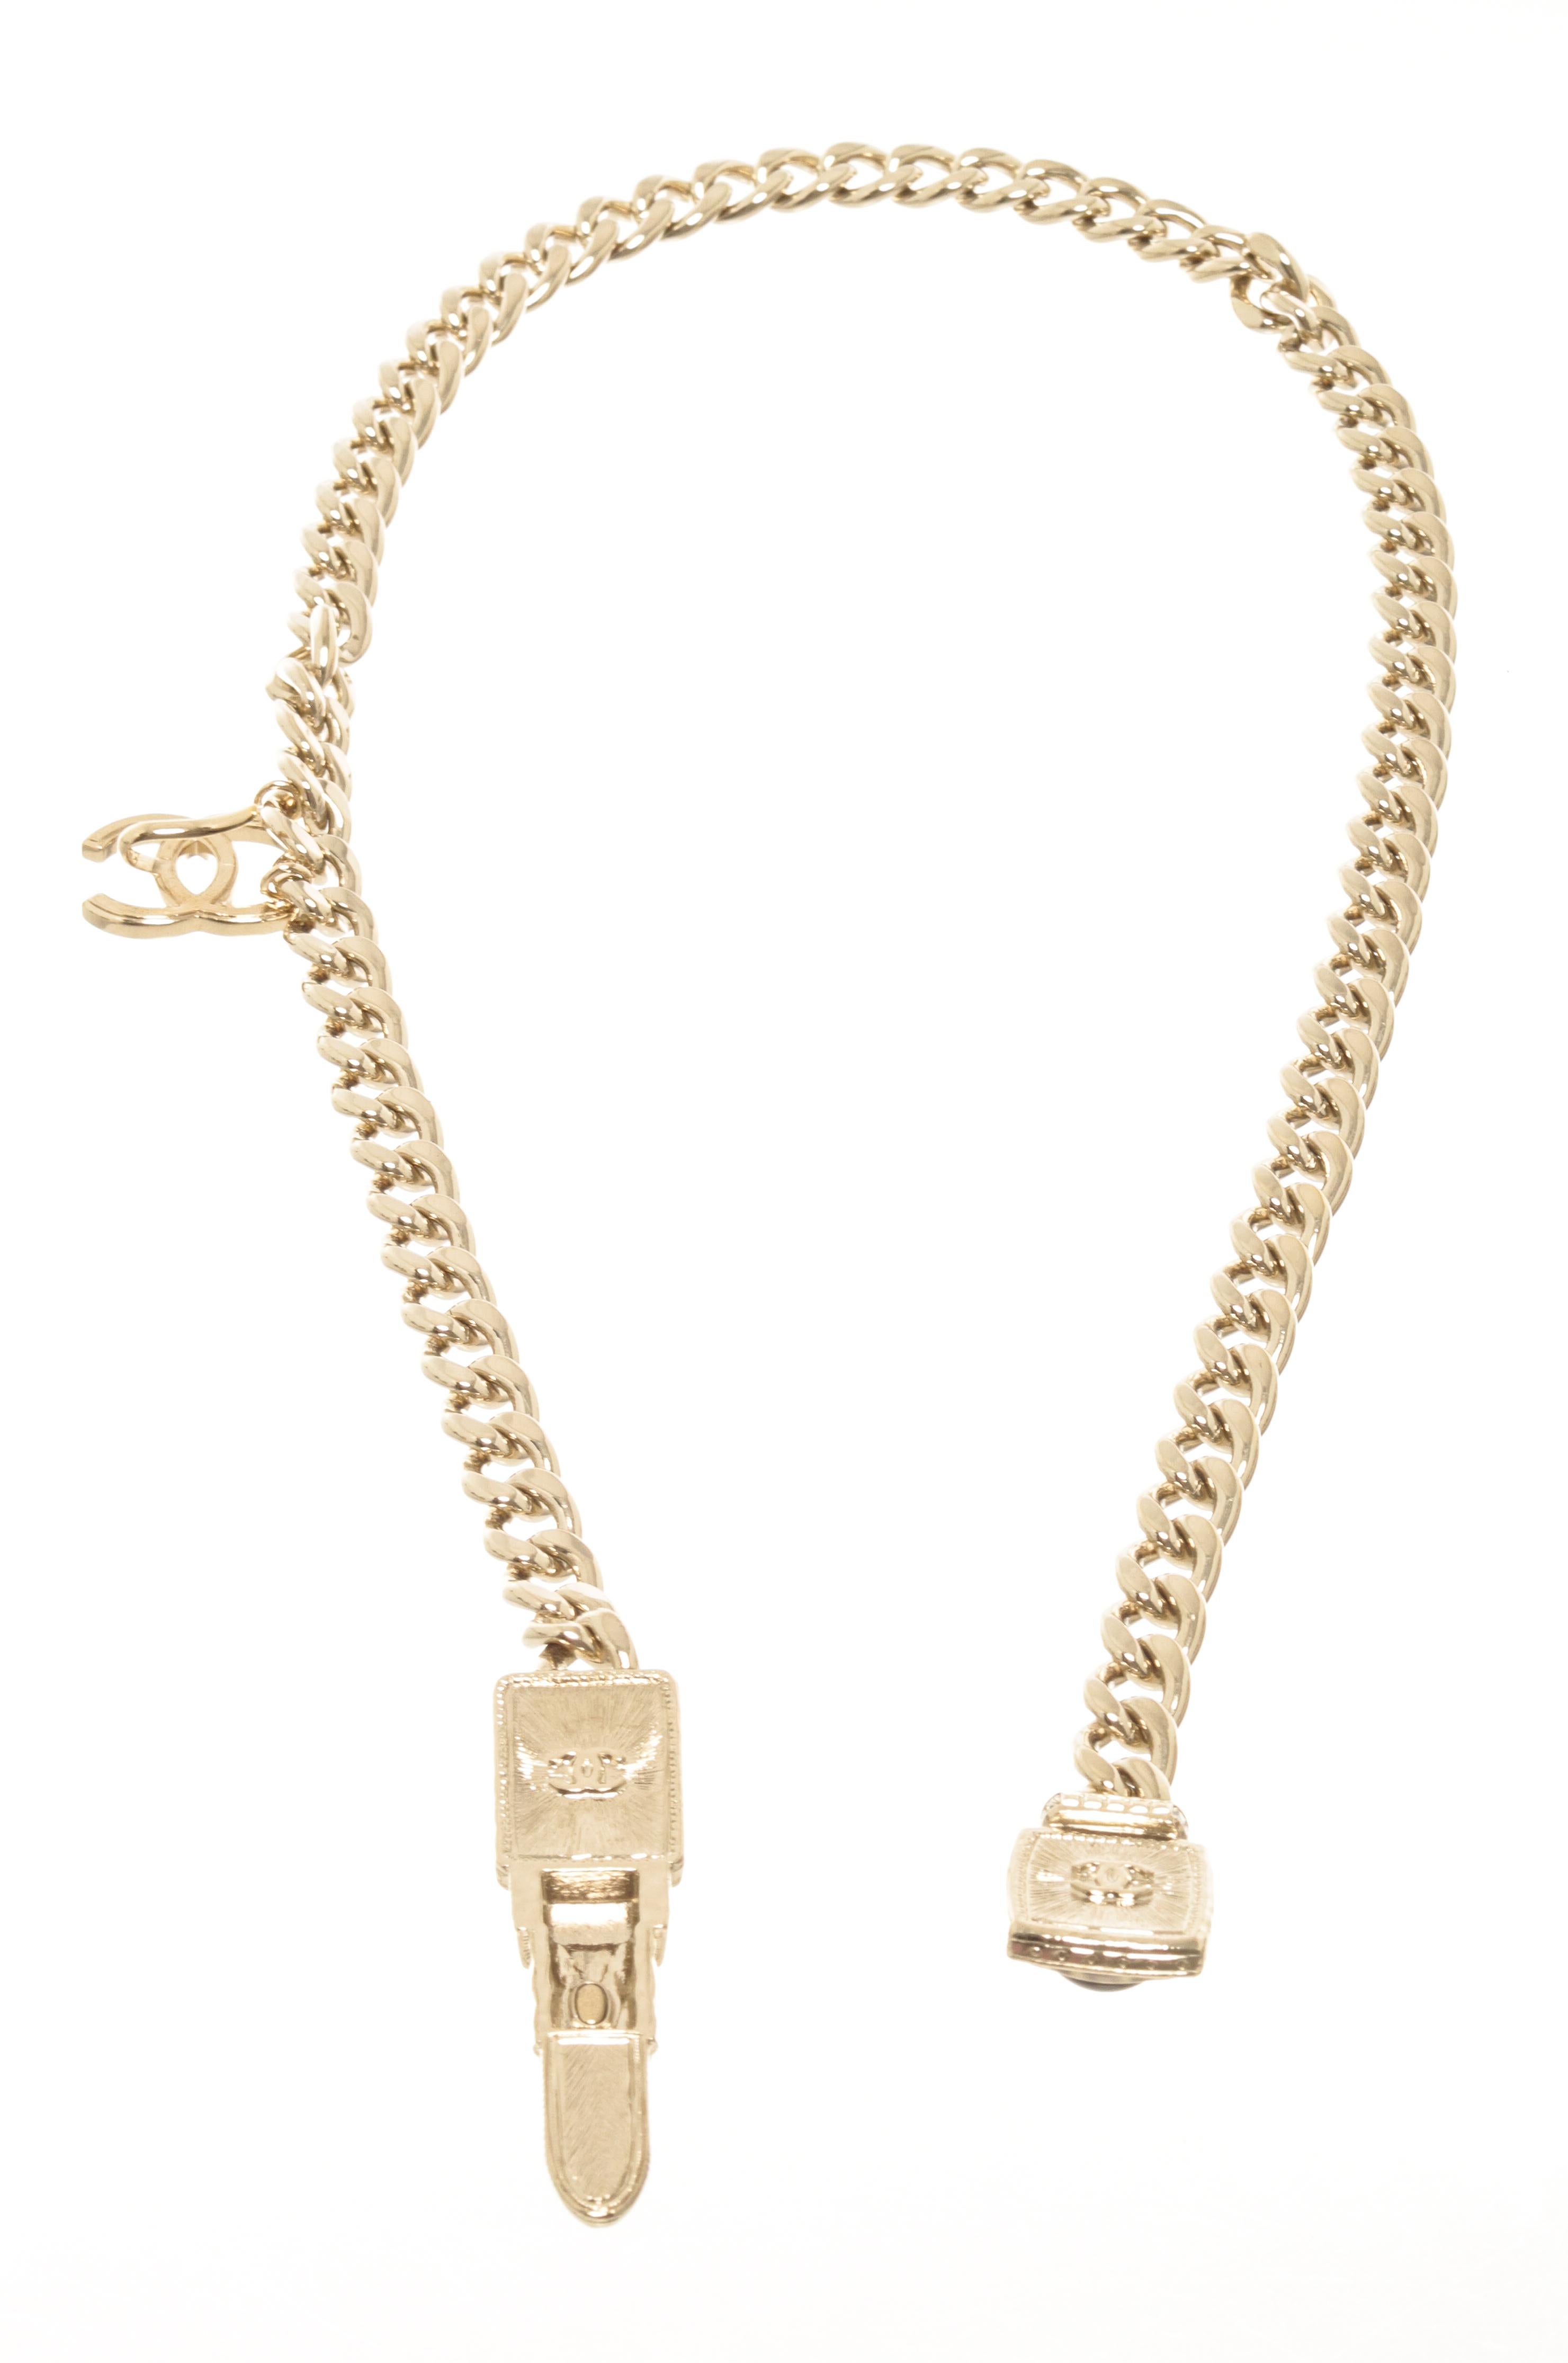 Chanel gold-tone CC lipstick chain with a lipstick charm with a CC logo and rhinestones on it on one end, a rhinestone CC logo in a square on the other end, and a CC rhinestone logo in the middle.



72361MSC